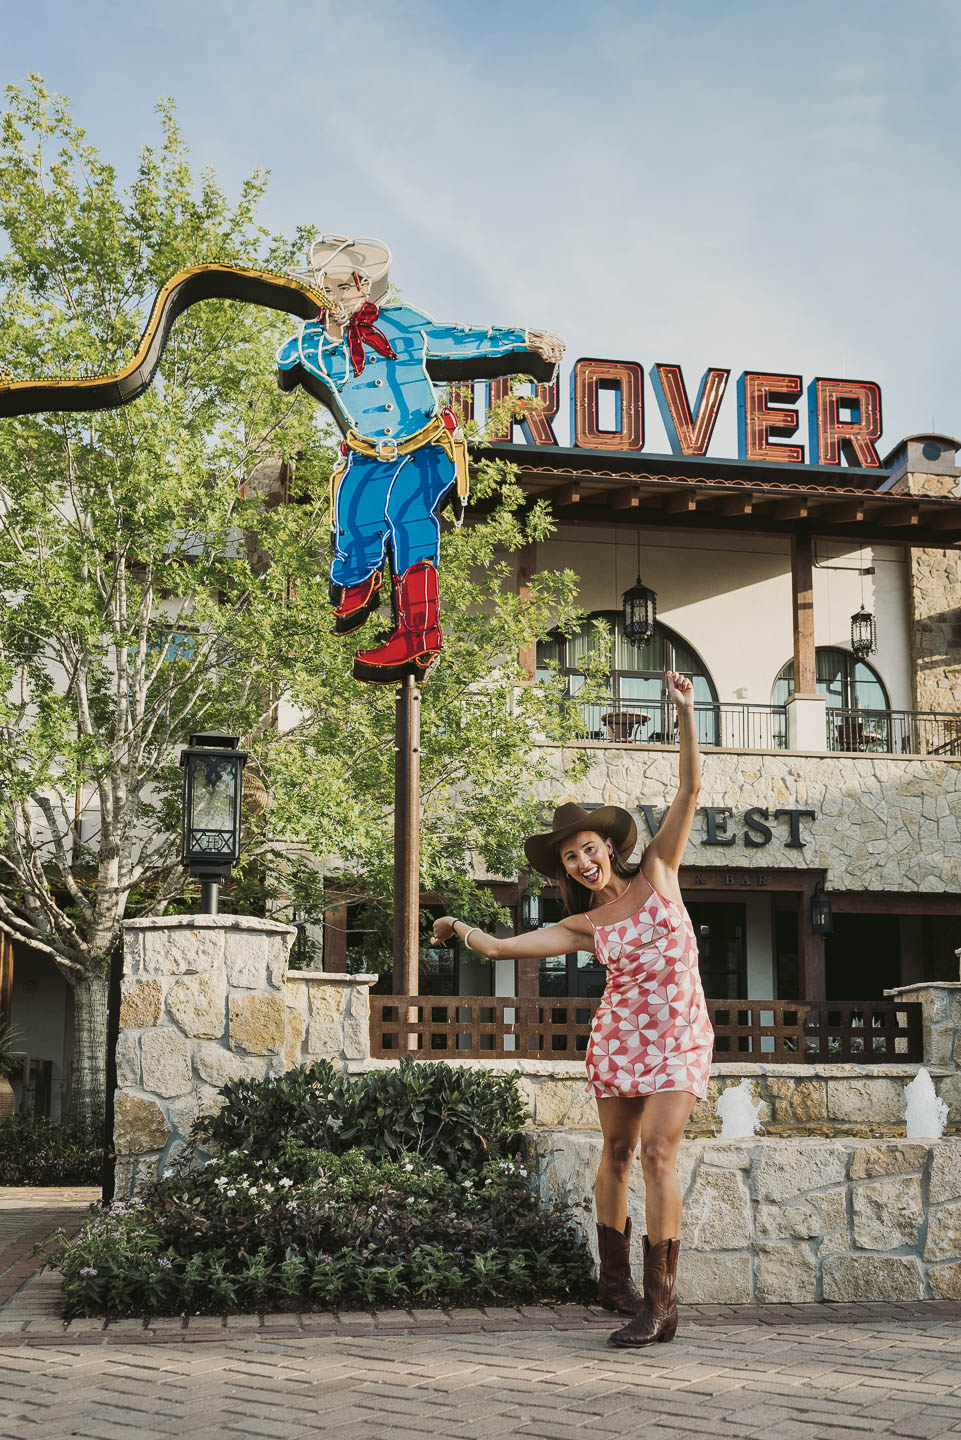 Hotel-Drover-Fort-Worth-5